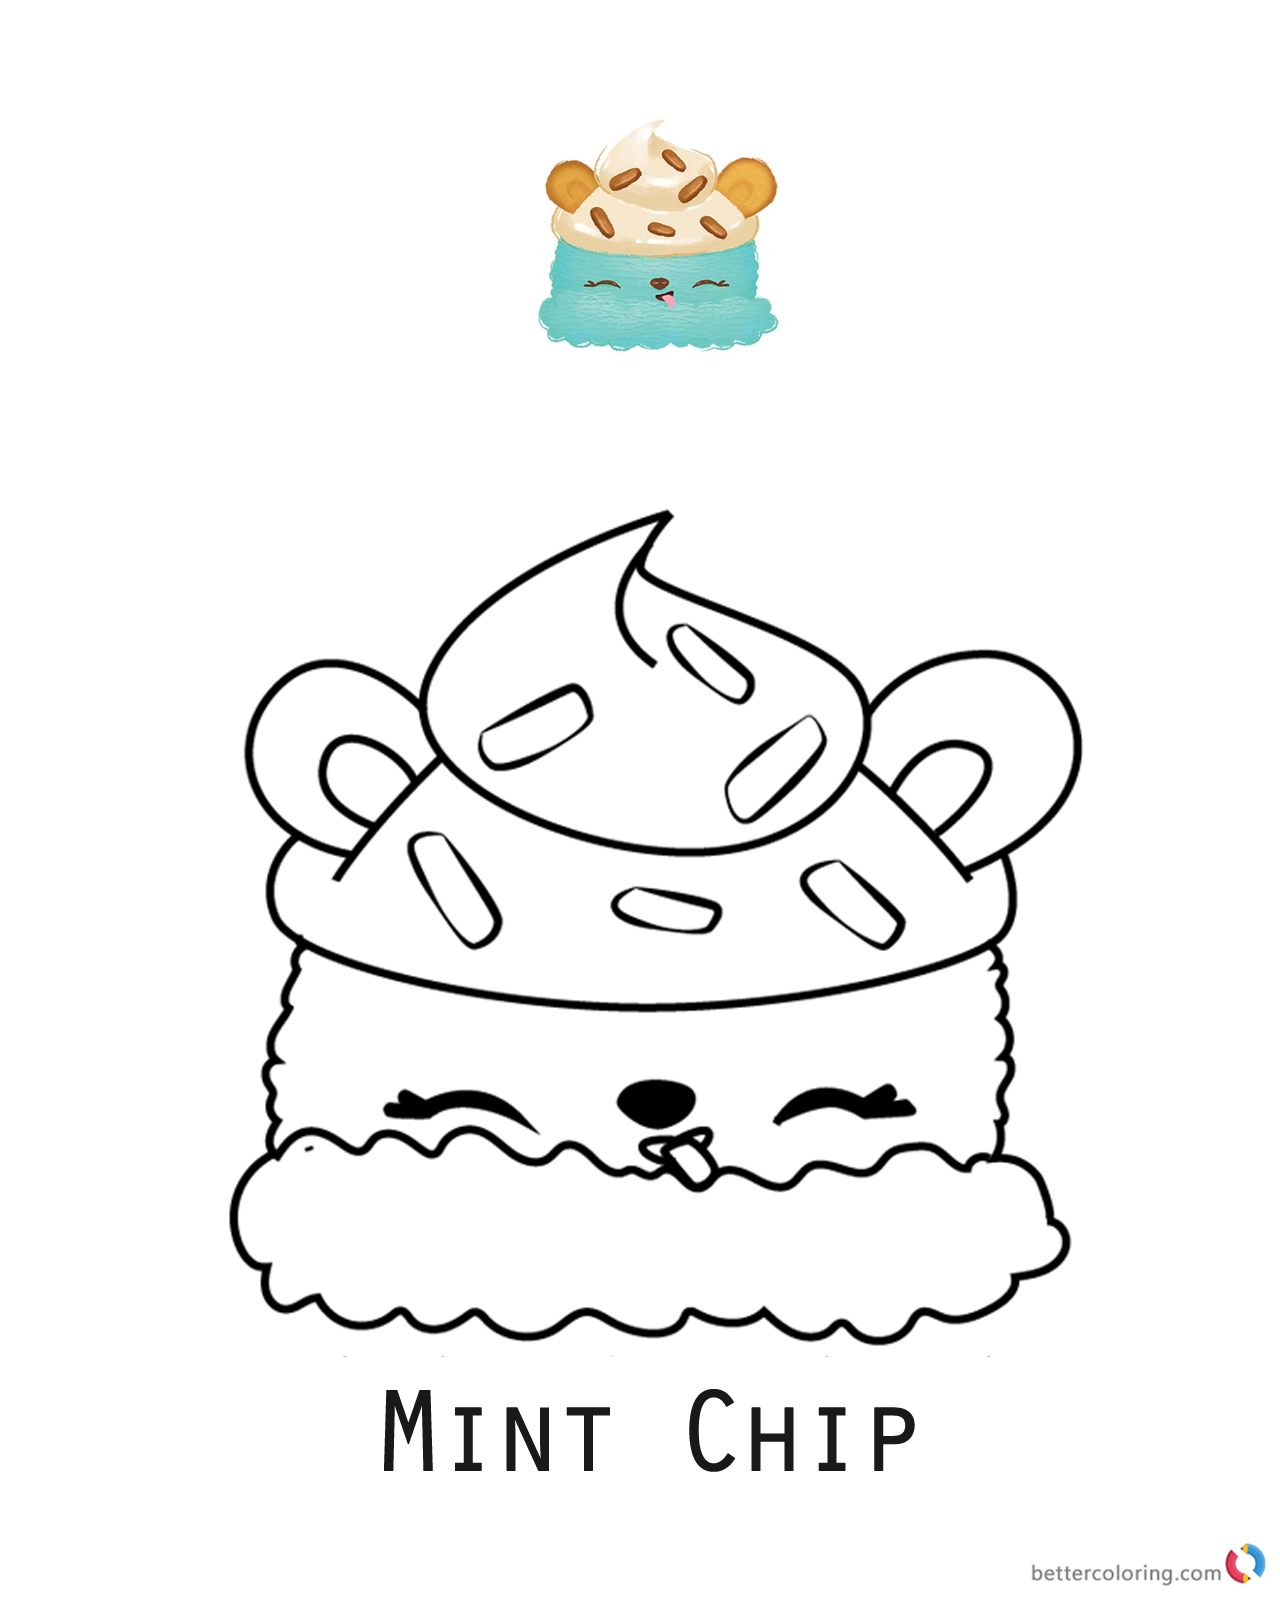 Minty Chip Num Noms Coloring Pages Series 1 - Free Printable Coloring Pages